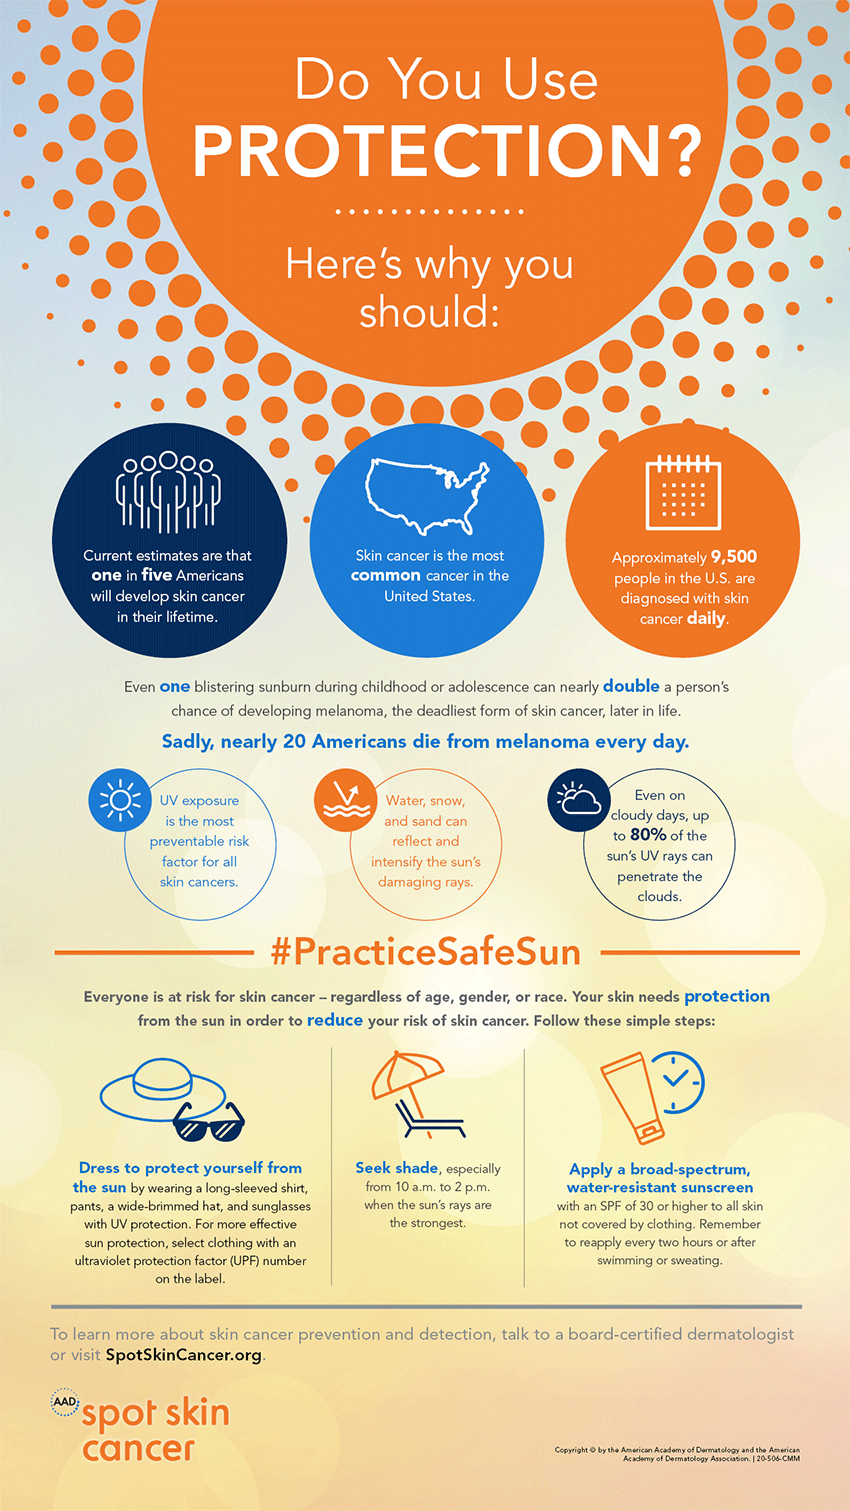 Use this infographic as a reminder to “practice safe sun” to reduce your risk of skin cancer.